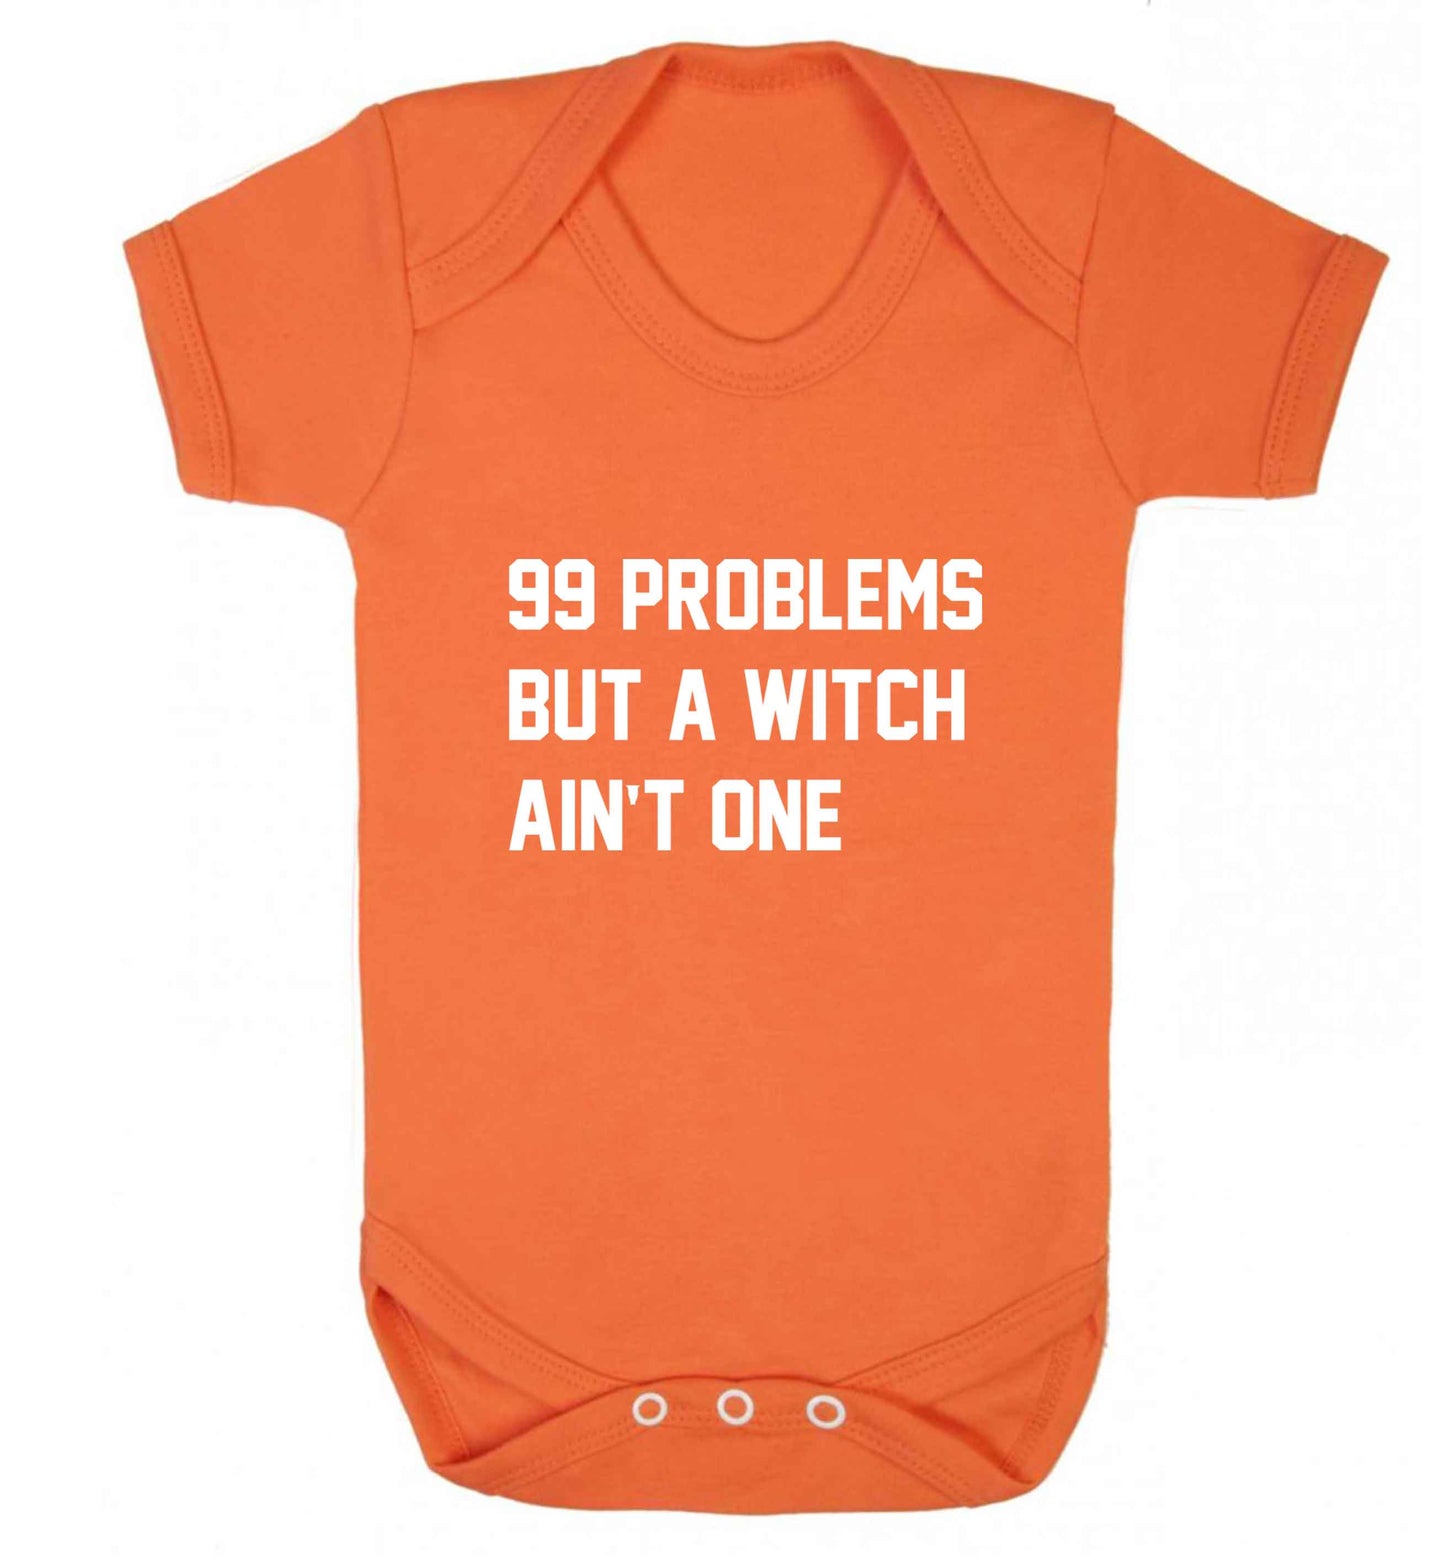 99 Problems but a witch aint one baby vest orange 18-24 months